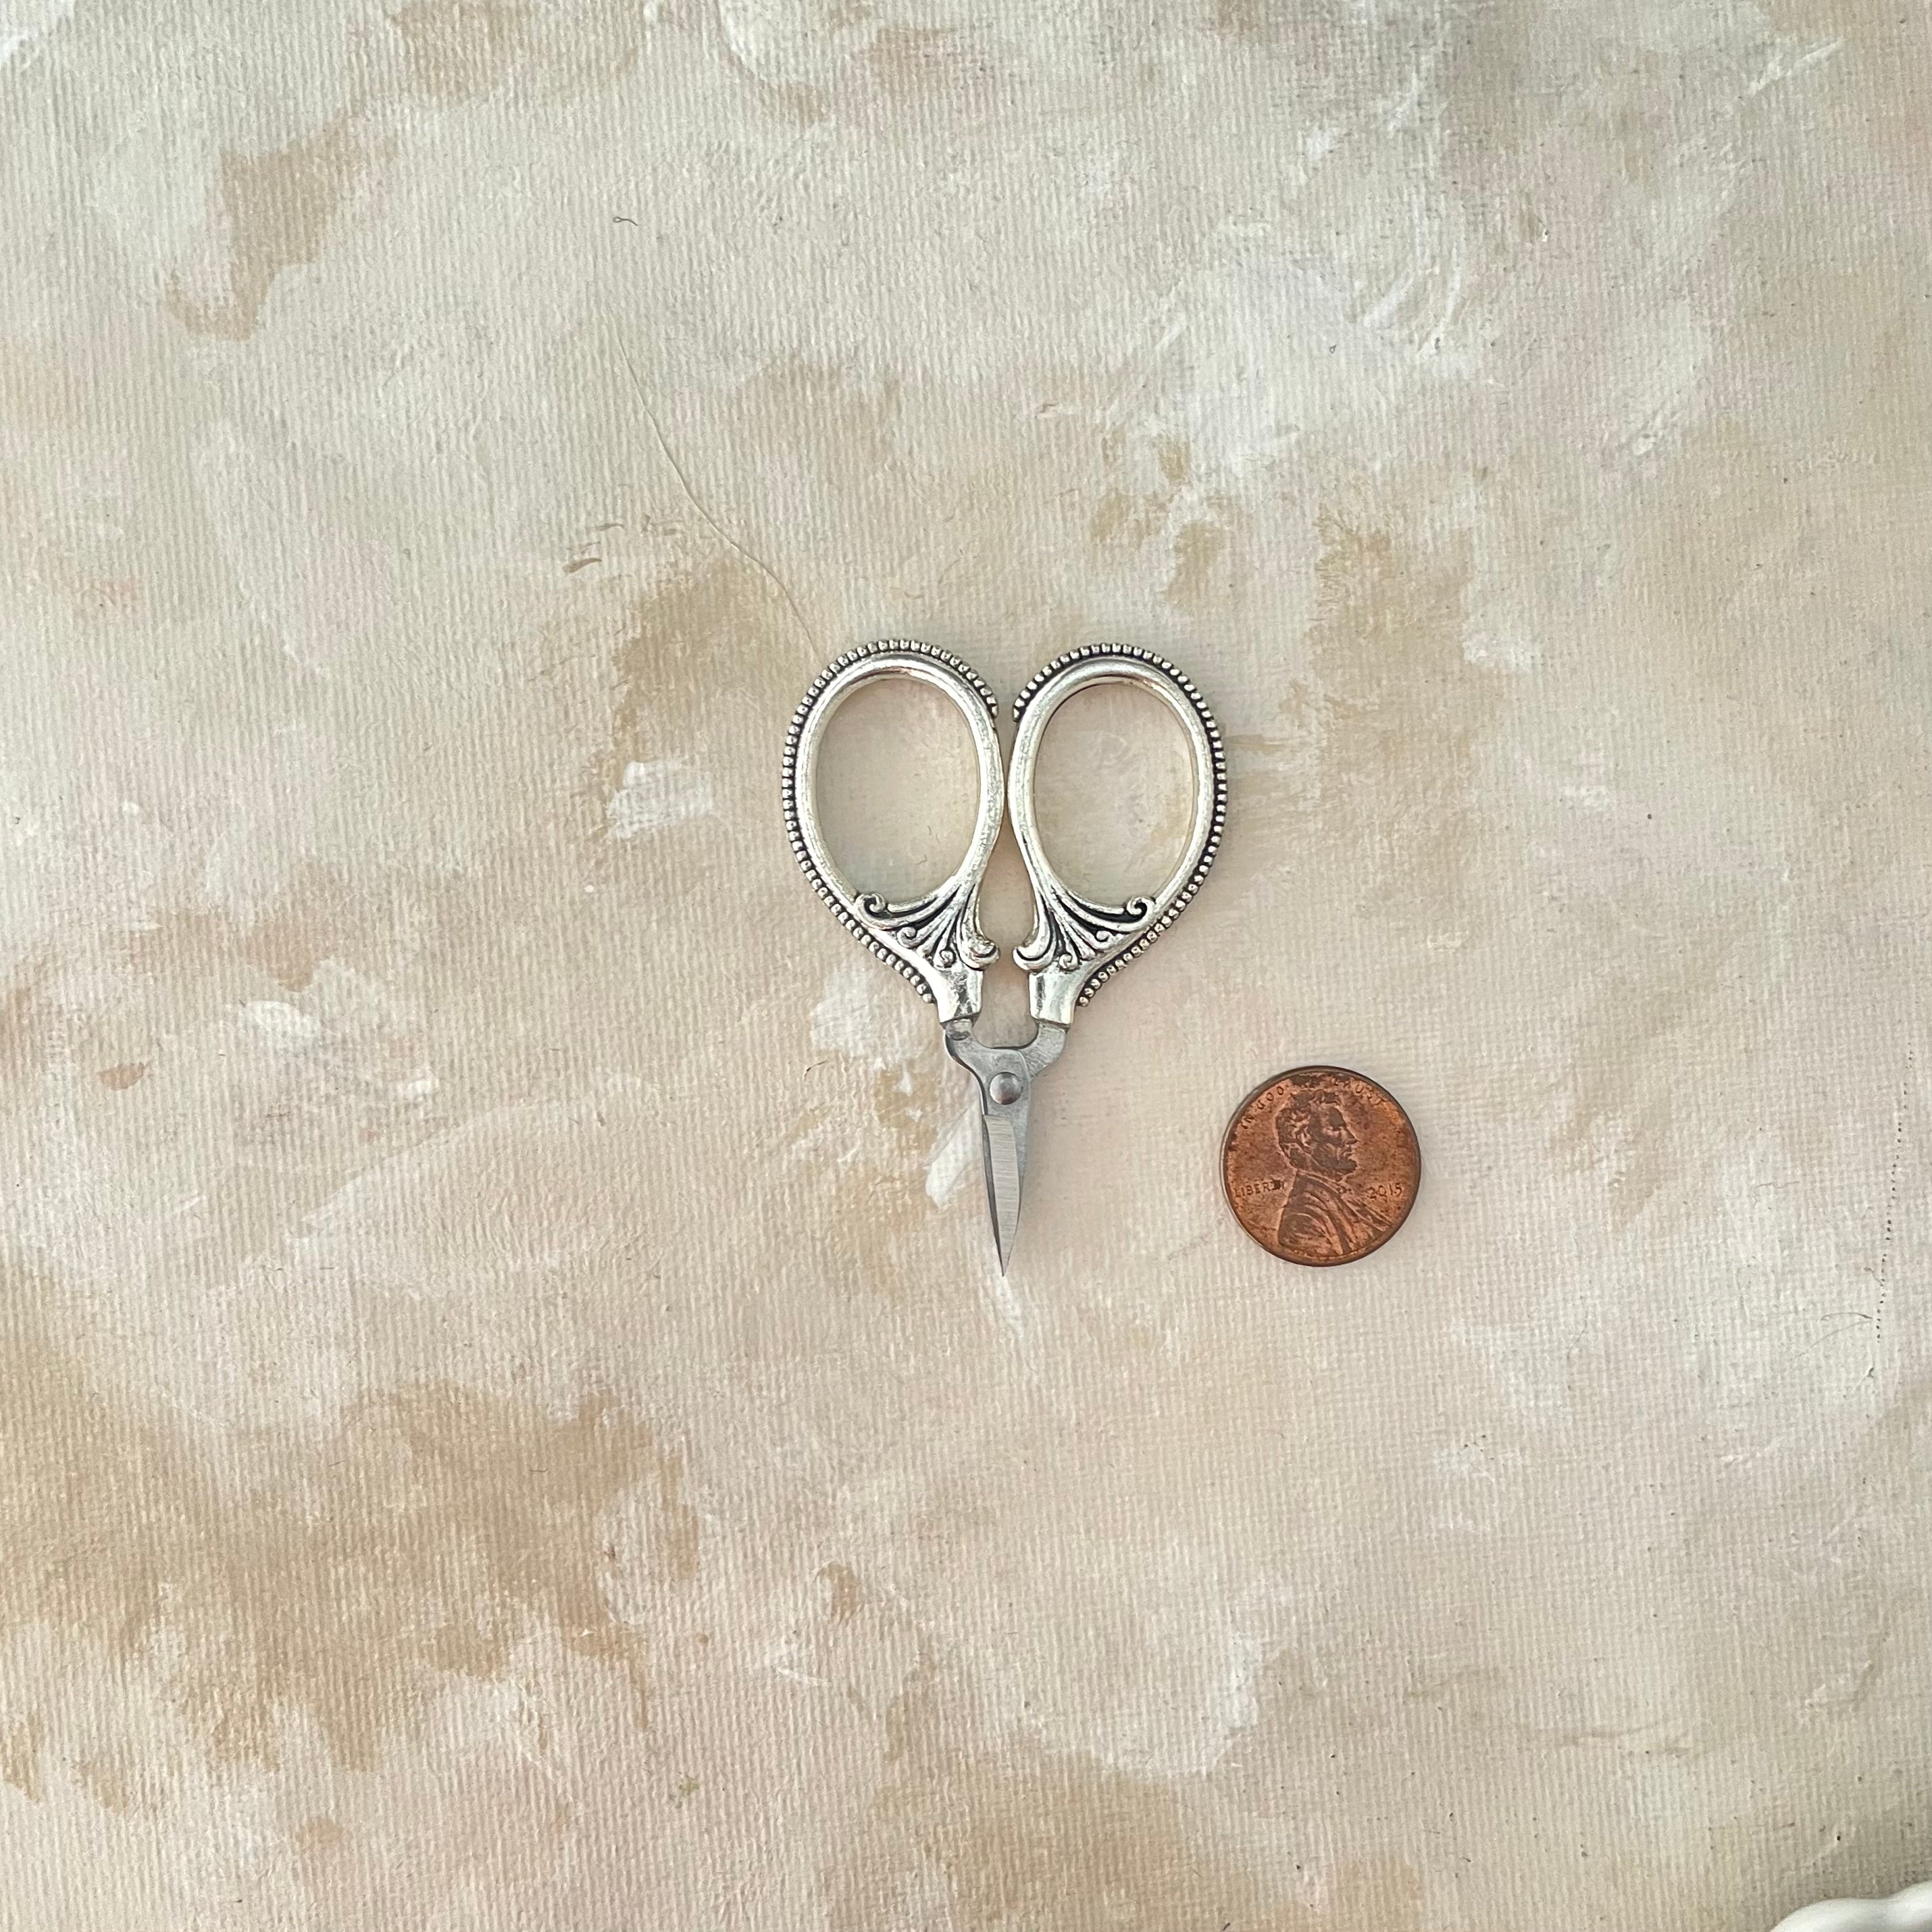 Mini SILVER Scissors: 2 ¼” long x 1 ⅝” at widest point -  Wedding Flat lay props from Champagne & GRIT